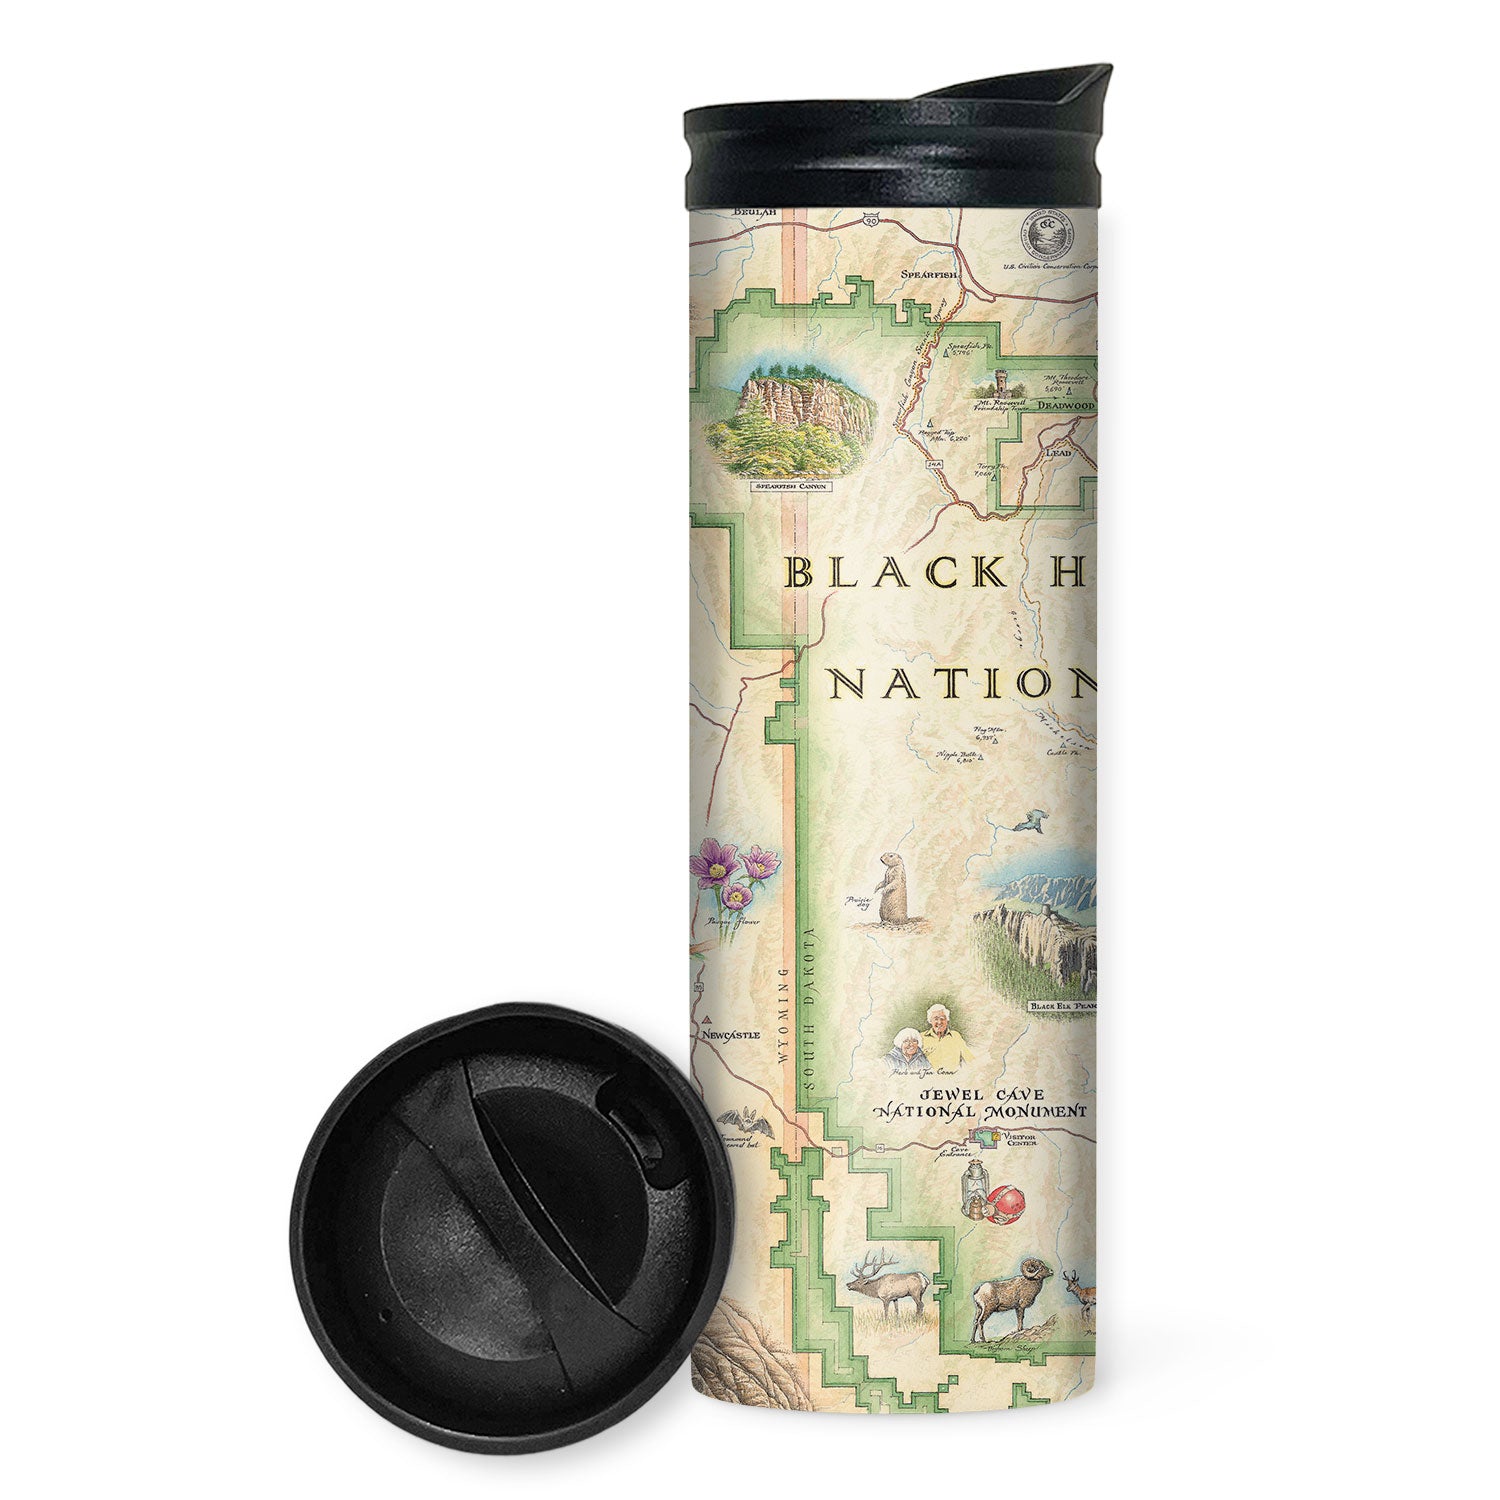 Black Hills National Forest Map Travel Drinkware by Xplorer Maps. Featuring cities like Rapid City, Spearhead, Rapid City, and Sturgis. Mount Rushmore, Devils Tower, Jewel Cave National Monument, Custards, and Wind Cave National Park. Flora and Fauna illustrations include bison, elk, mountain goats, birds, pine trees, and native flowers. 